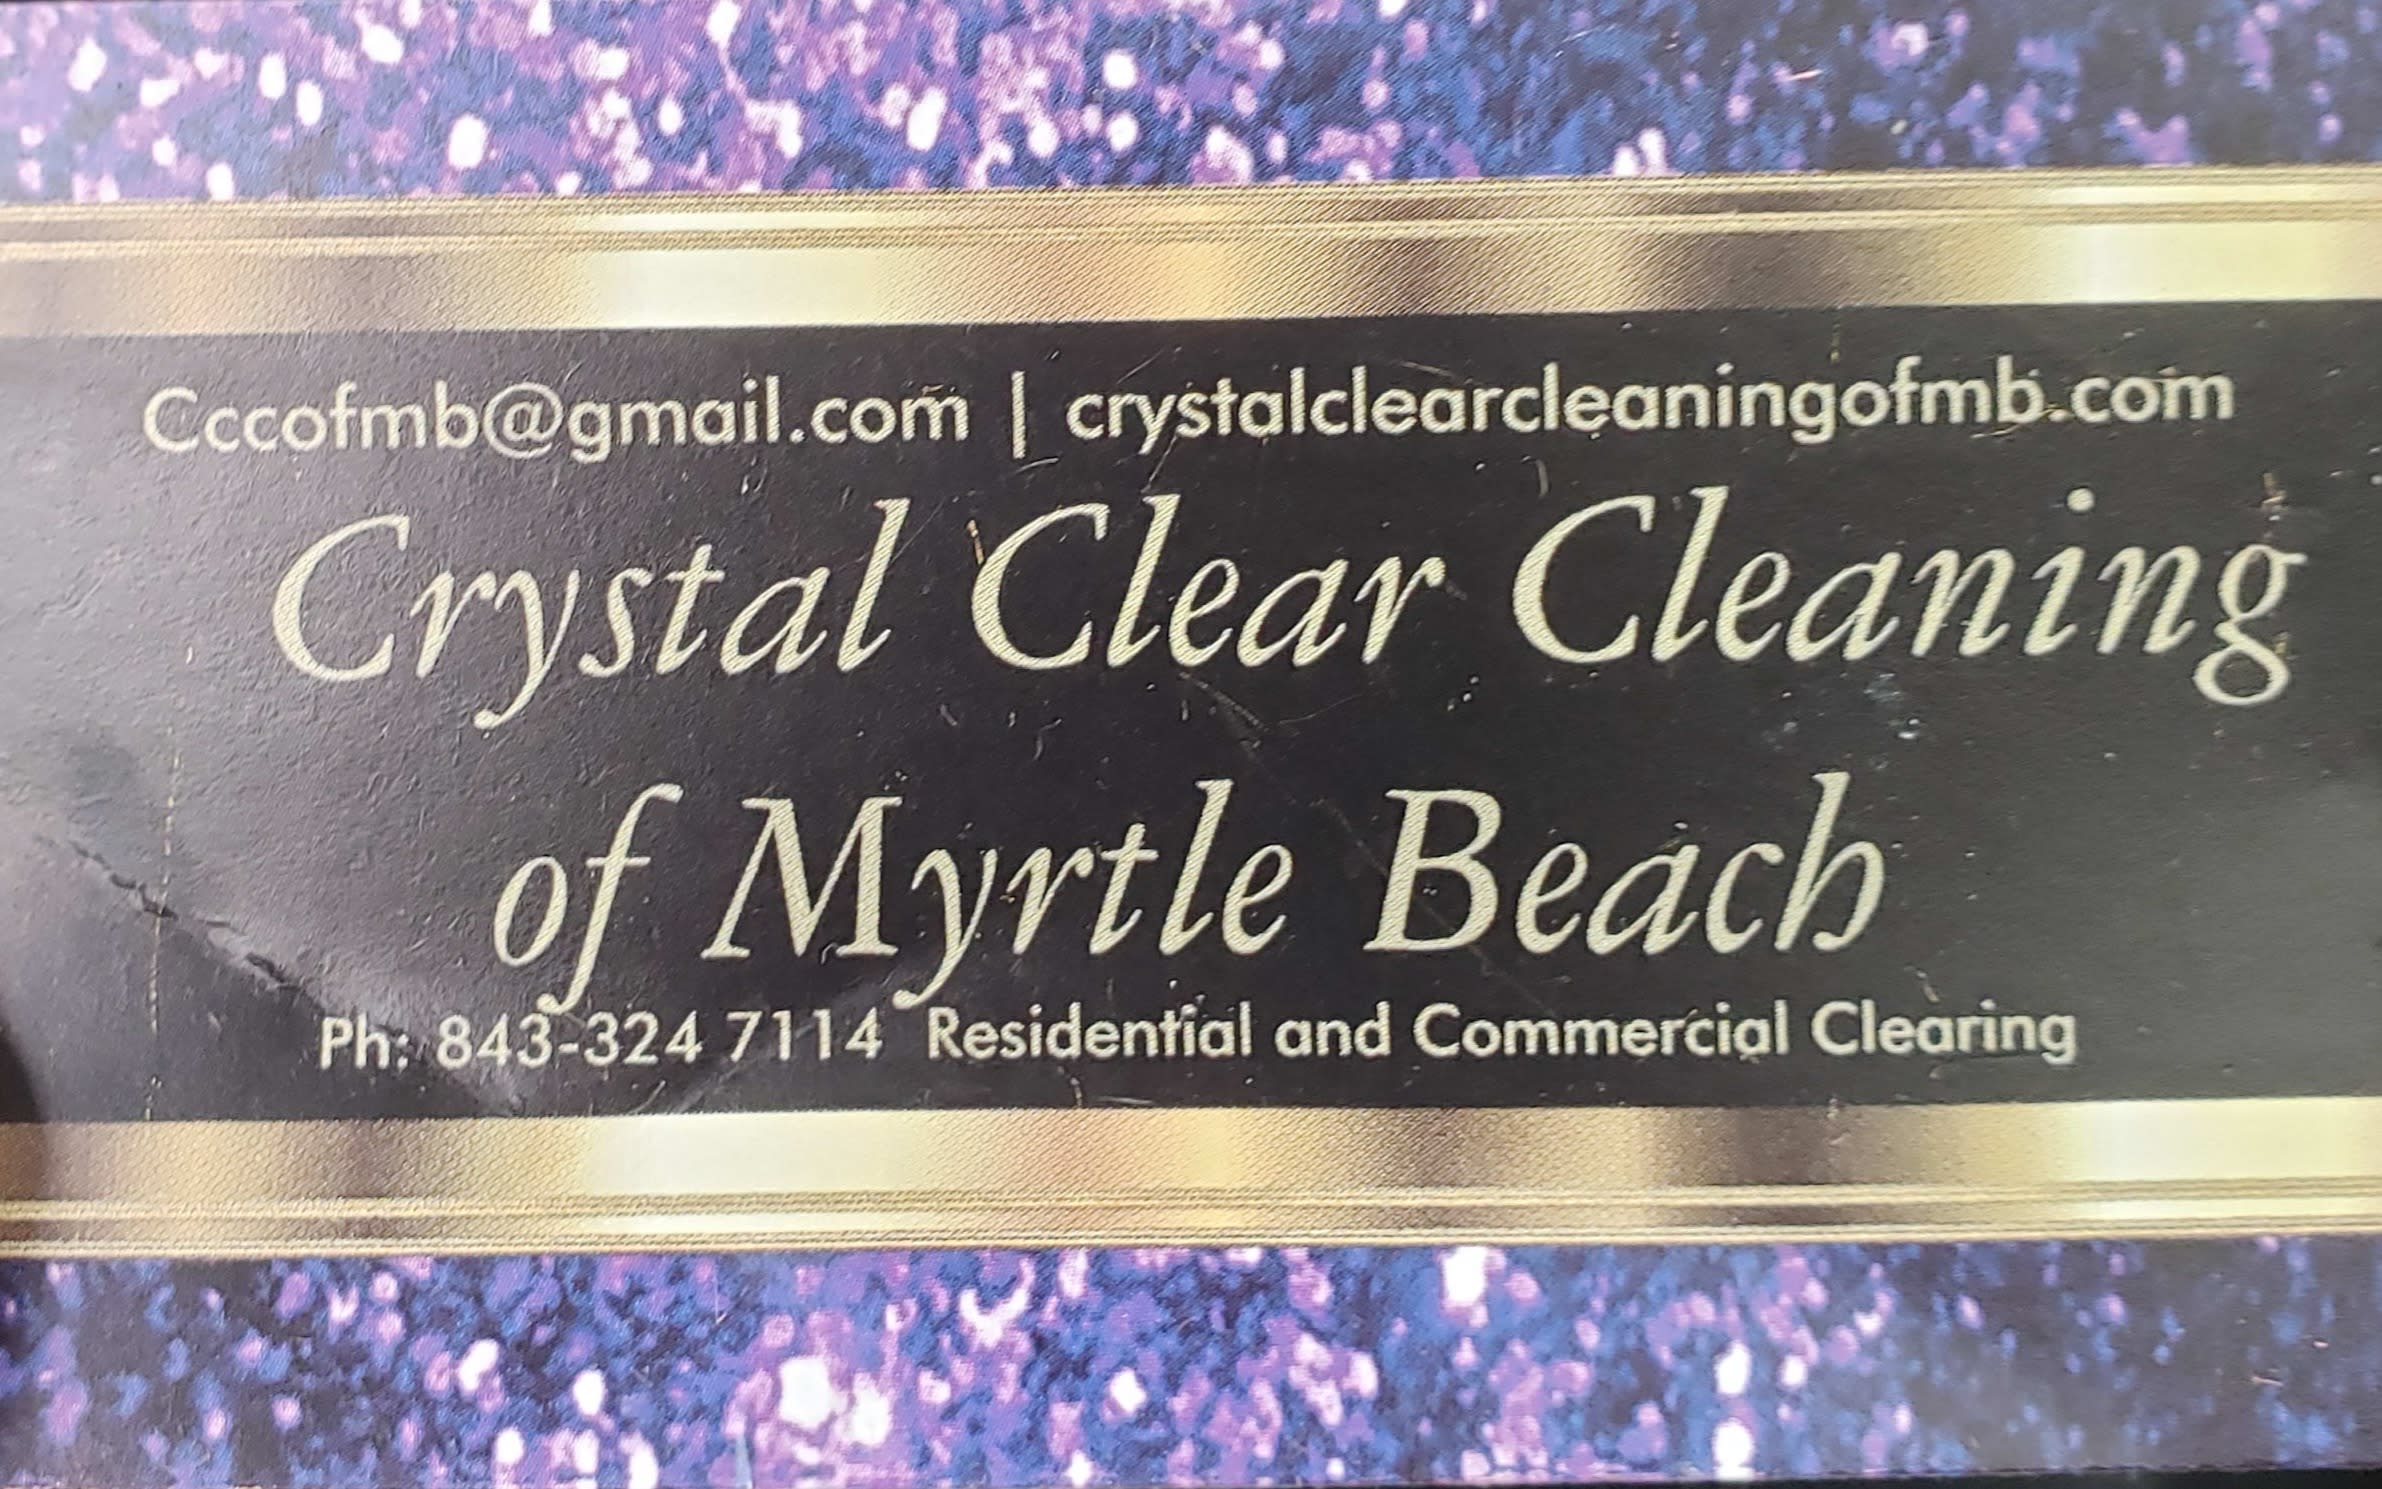 Crystal Clear Cleaning Of Myrtle Beach